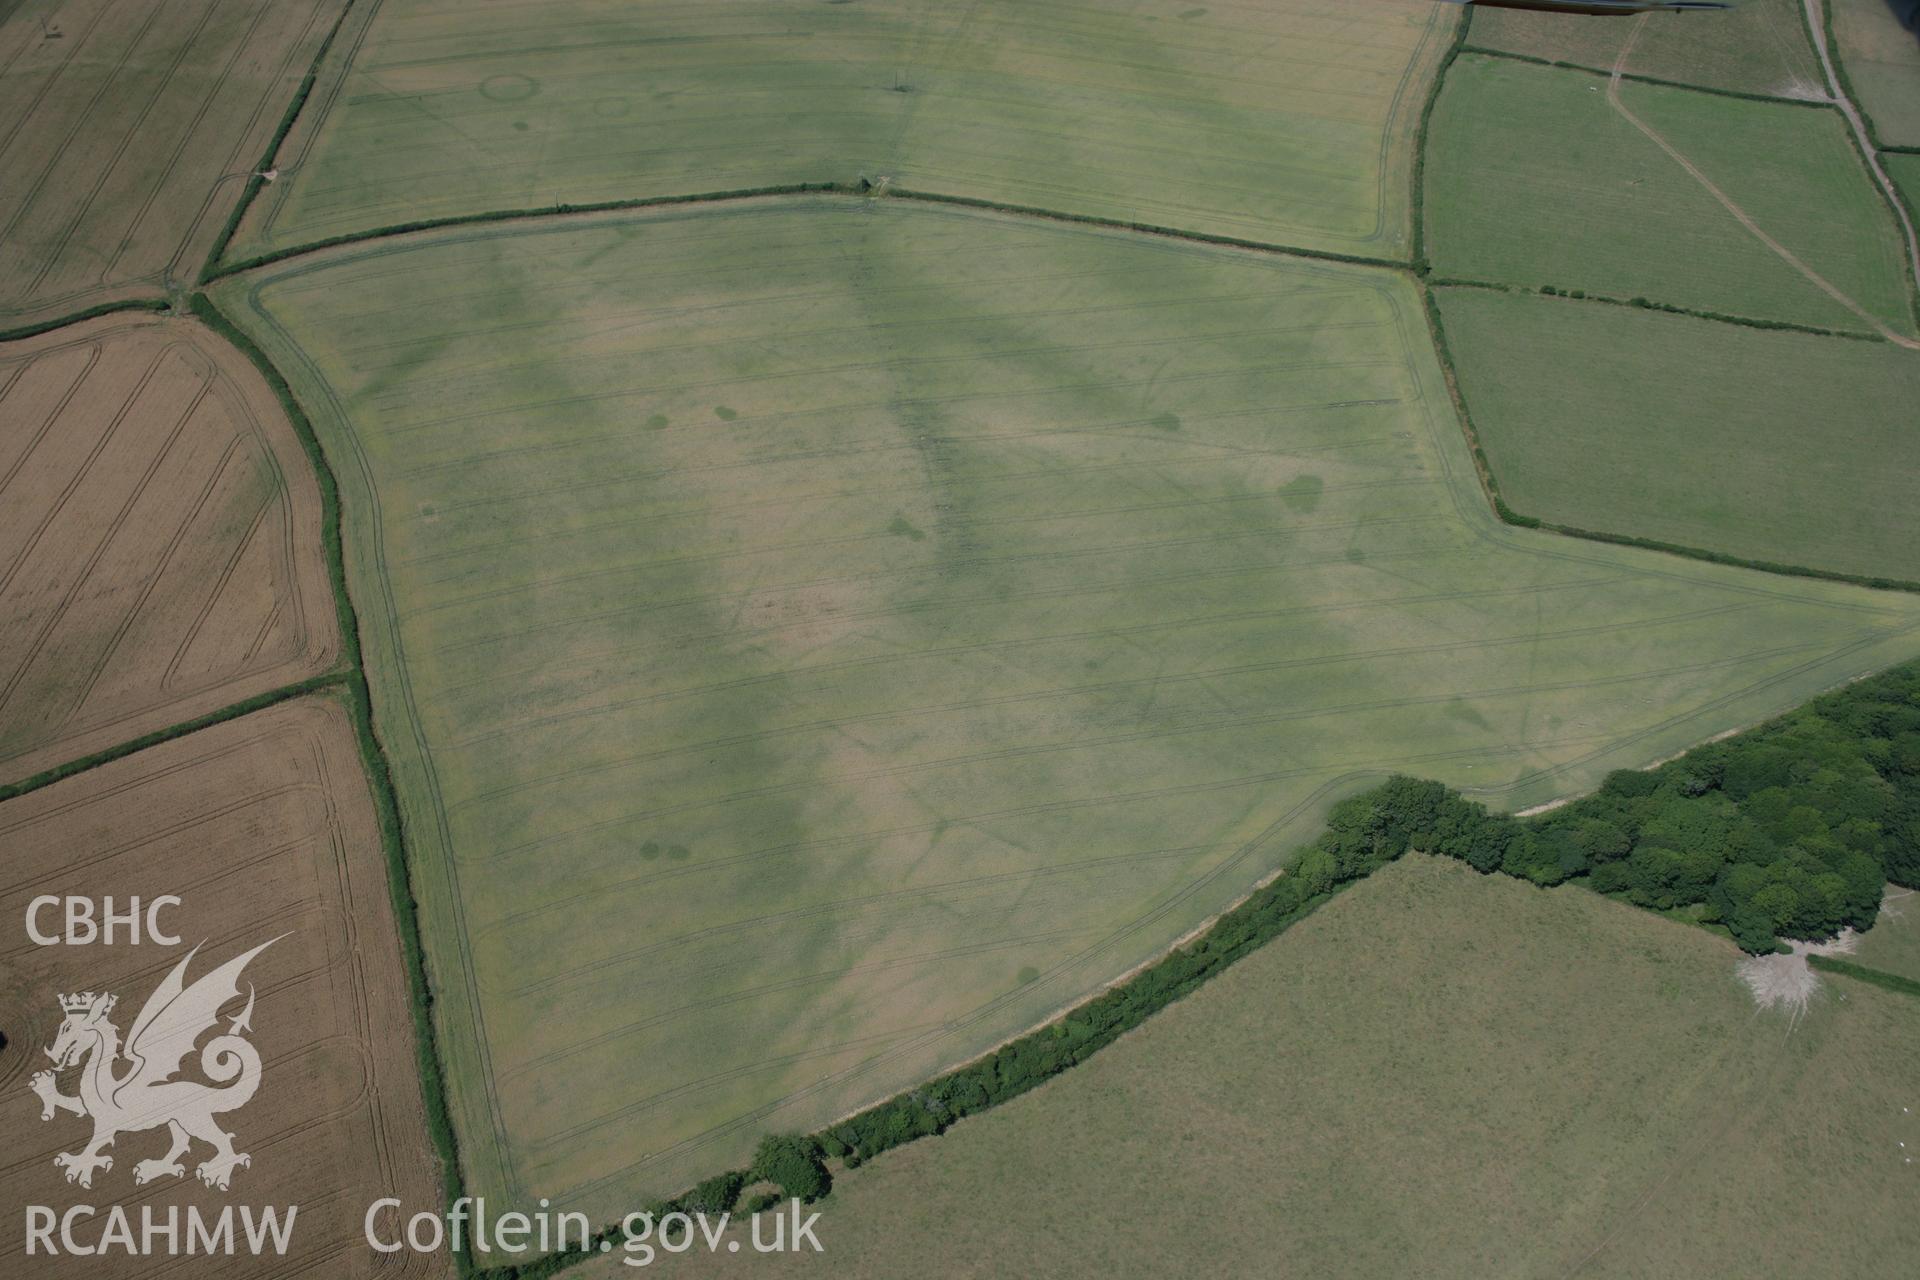 RCAHMW colour oblique aerial photograph of St Donat's Deserted Village. Taken on 24 July 2006 by Toby Driver.